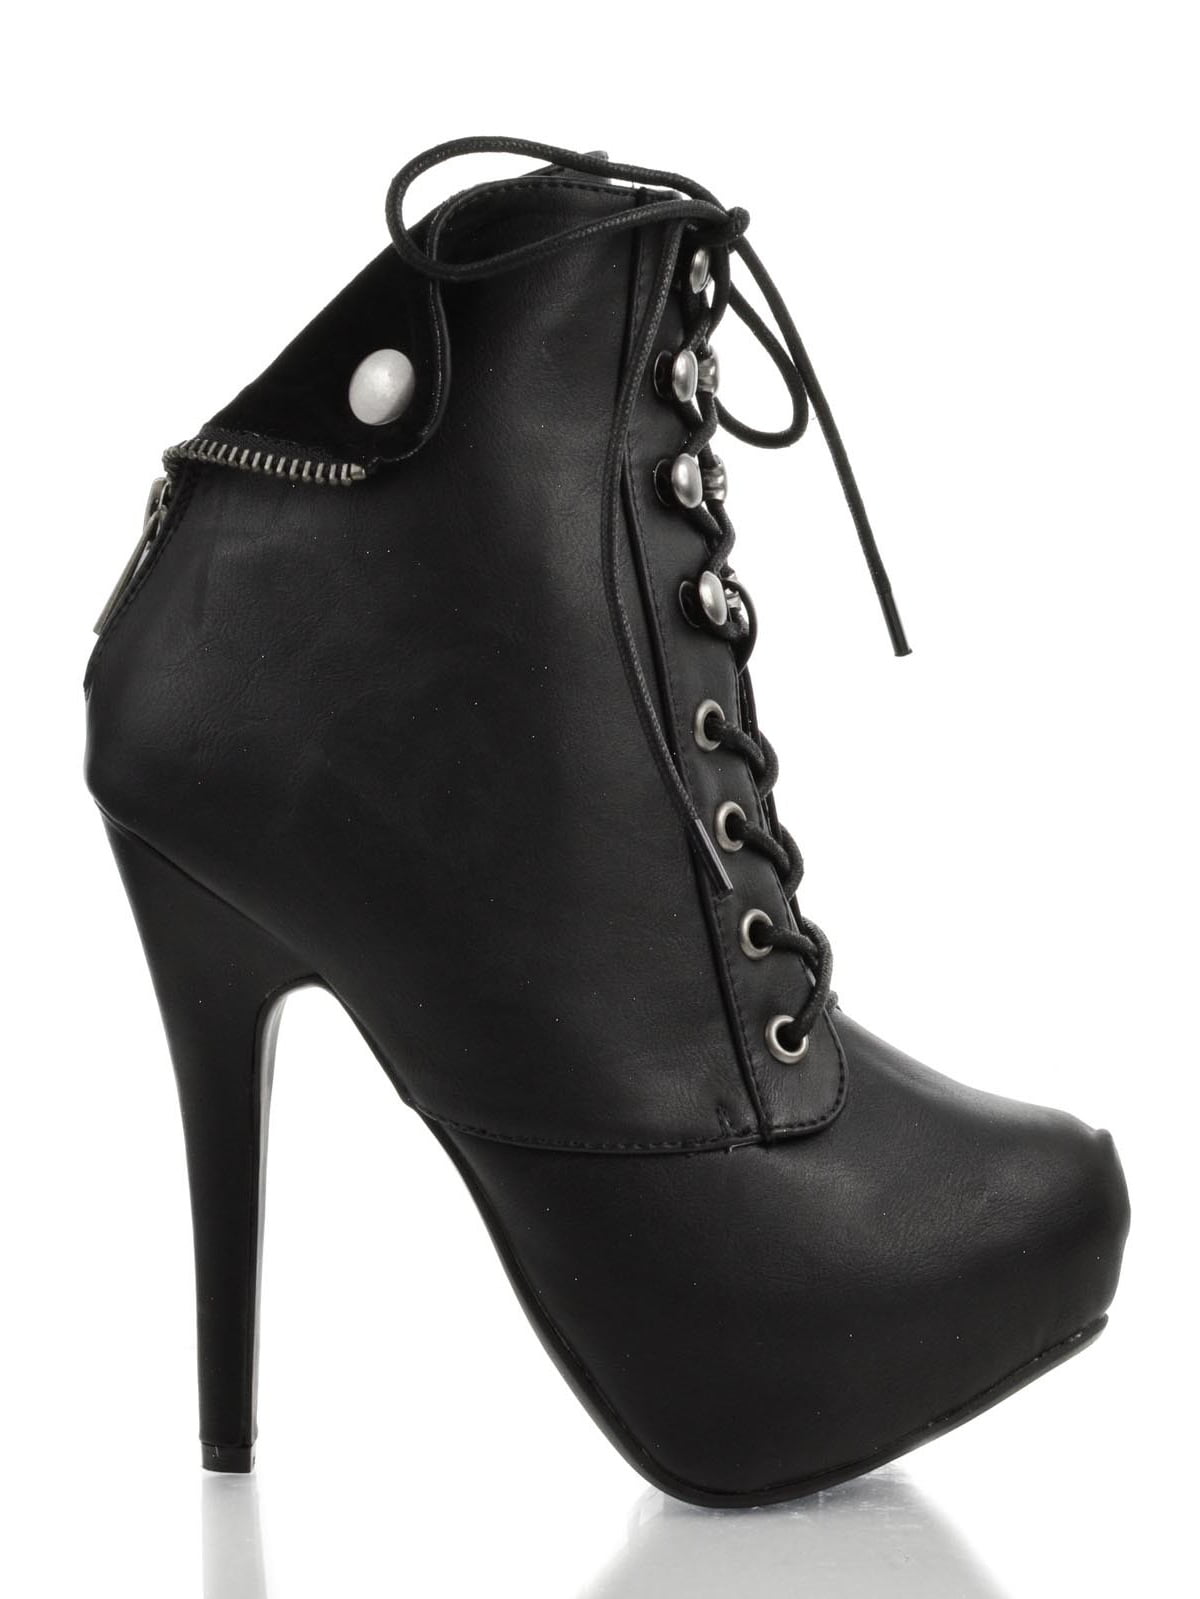 Ericka62 by Bamboo, High Stiletto Heel Lace Up Ankle Bootie w Folded ...